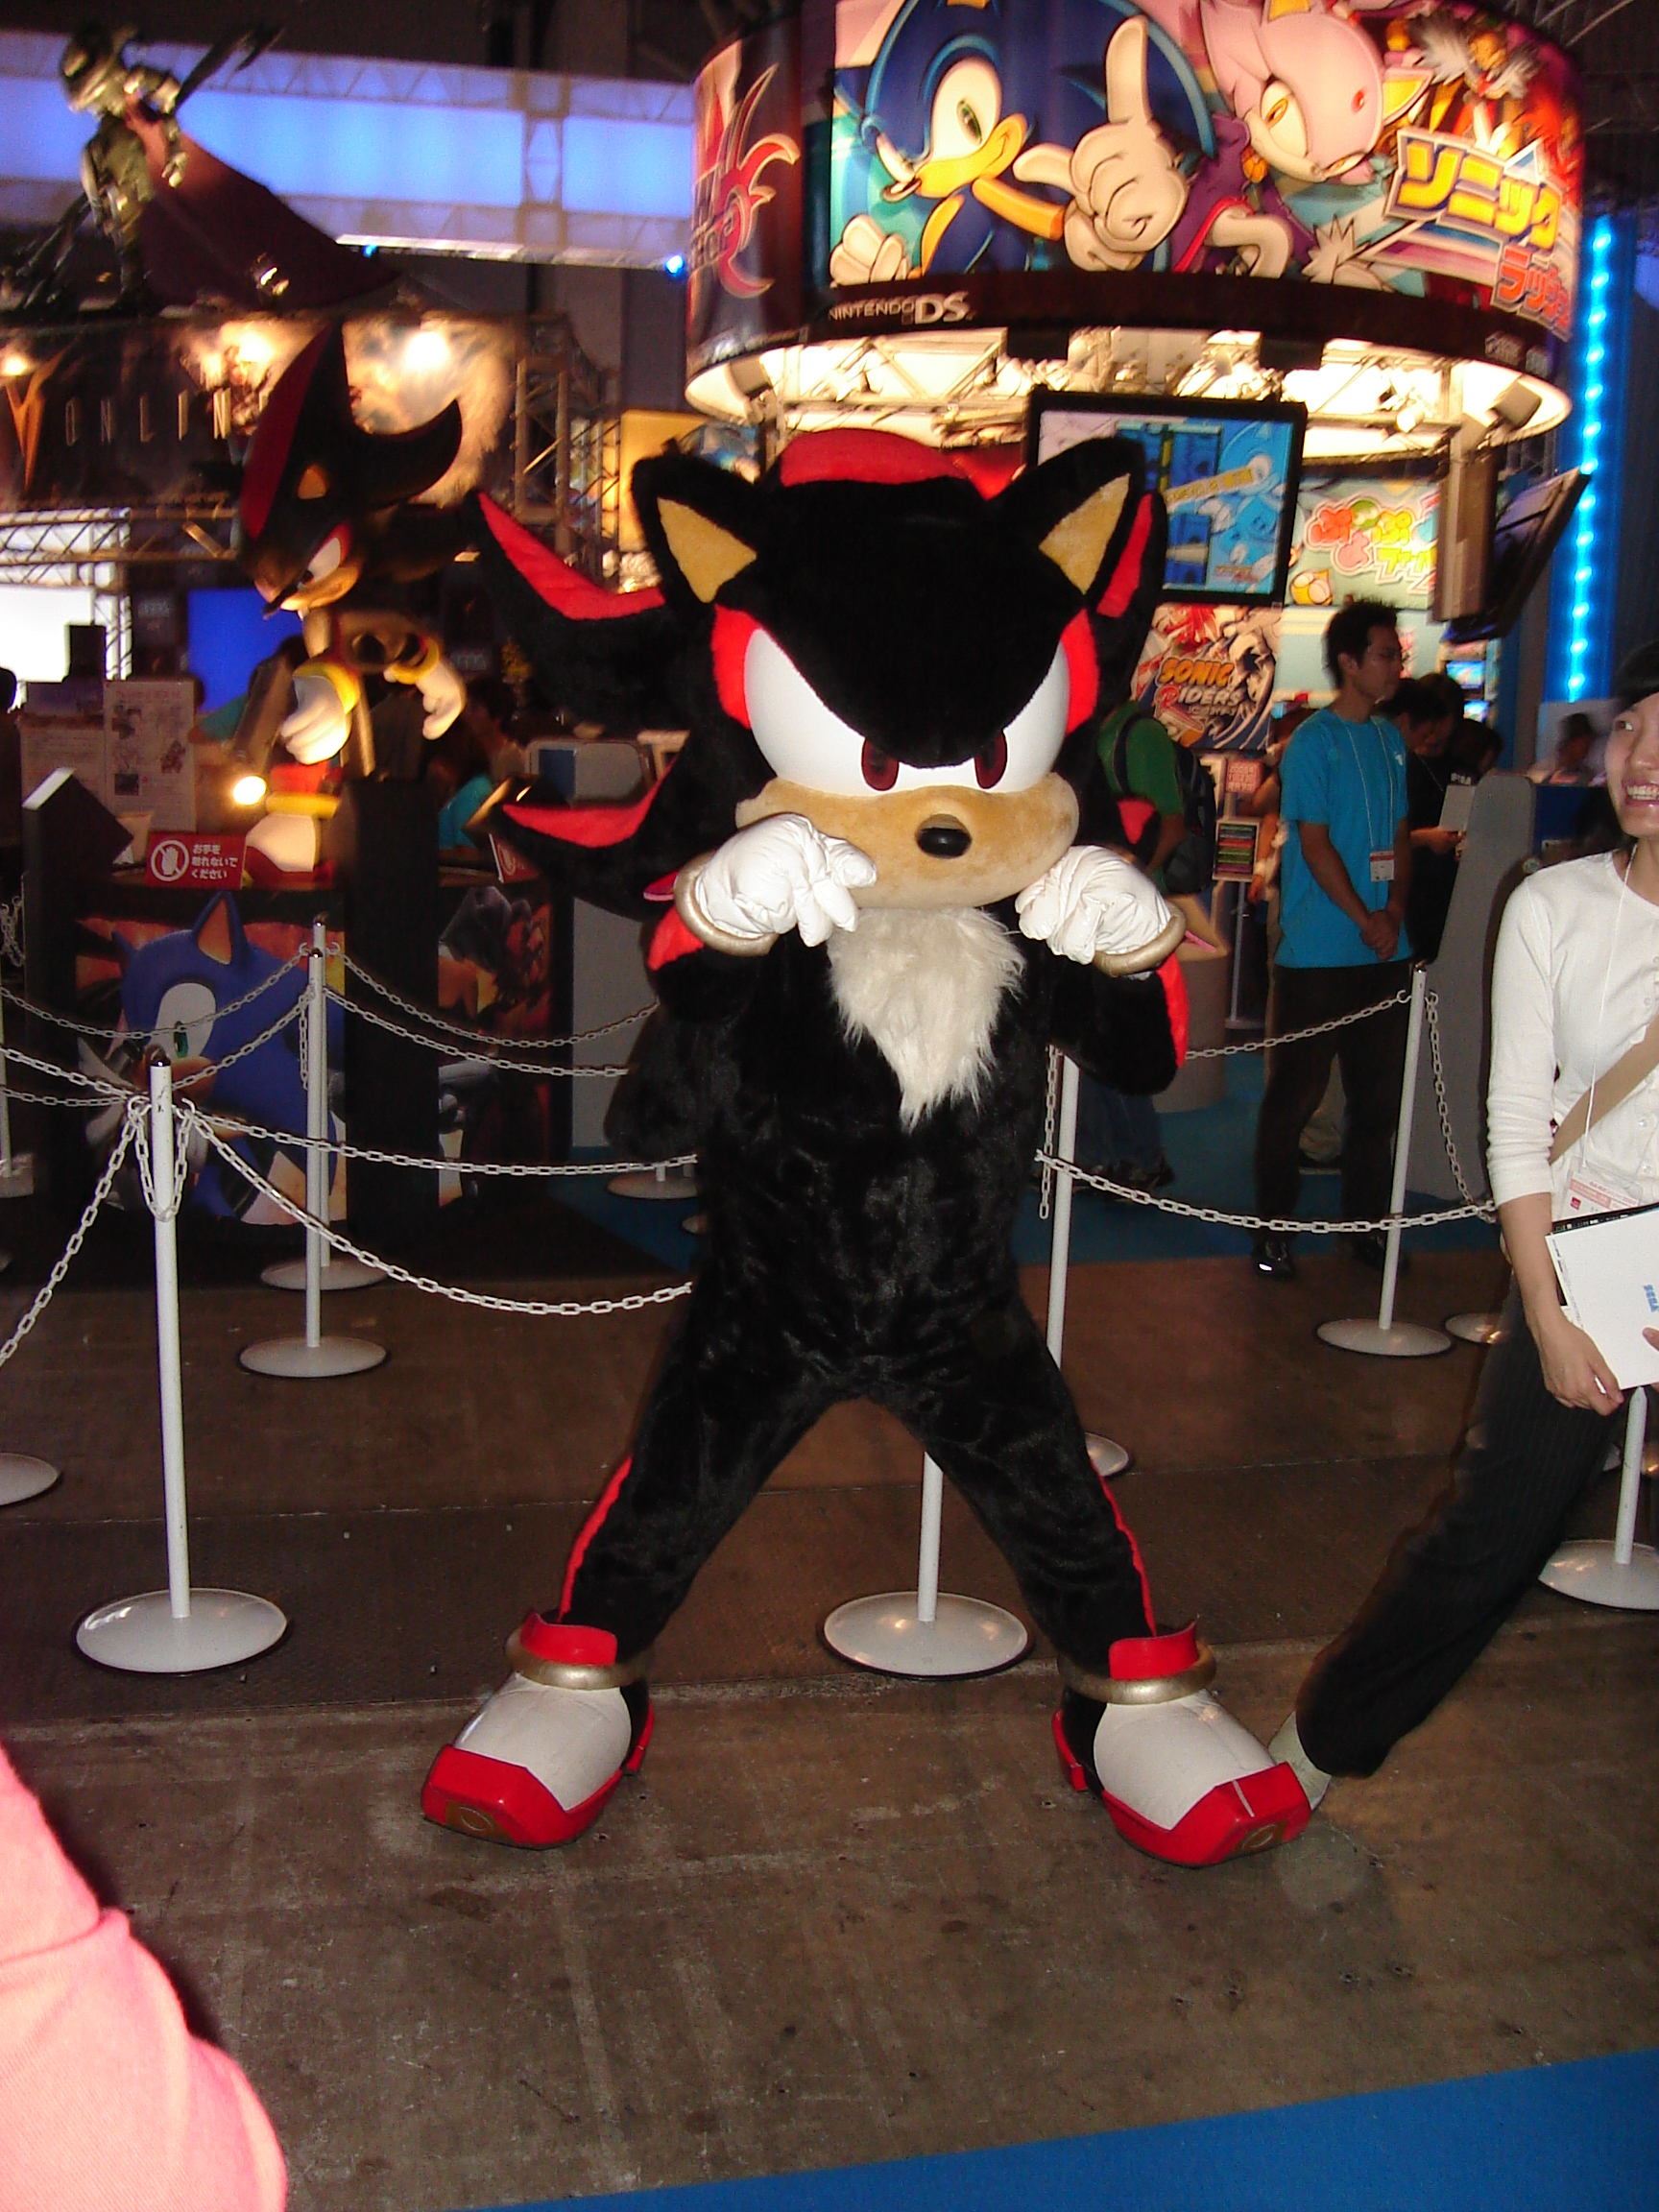 a person dressed as shadow the hedgehog strikes a pose